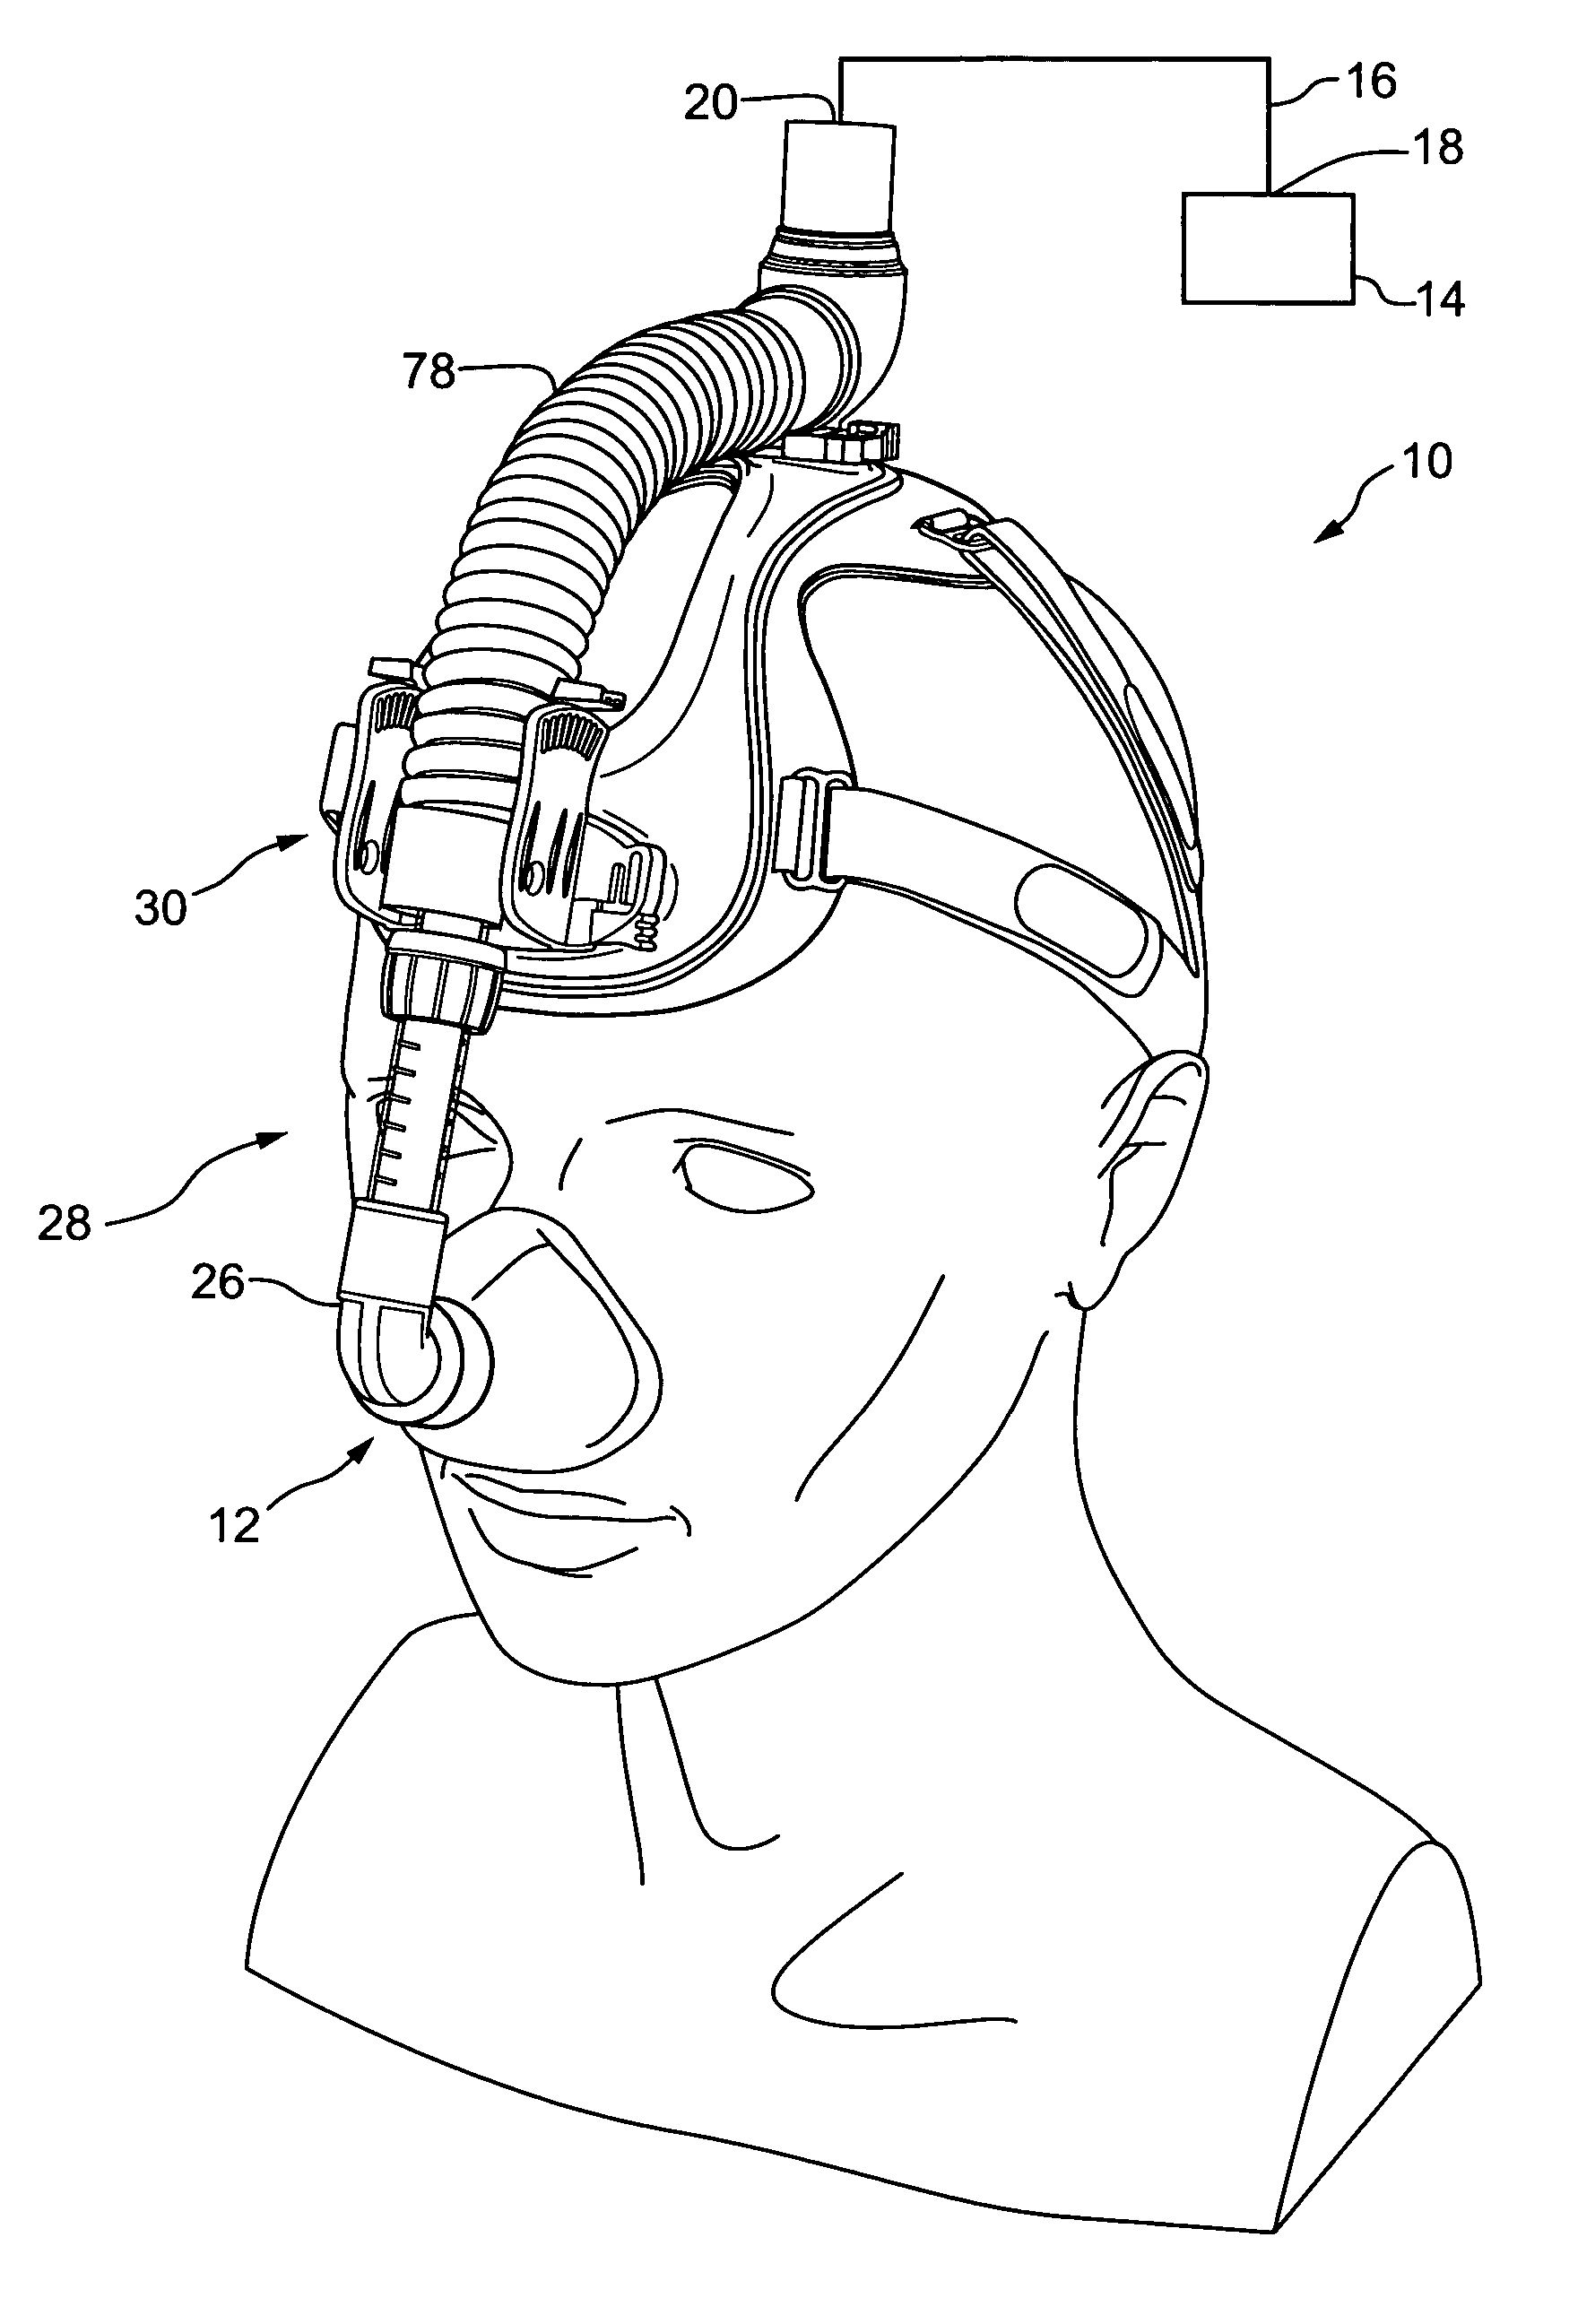 Headgear assembly for a respiratory support system